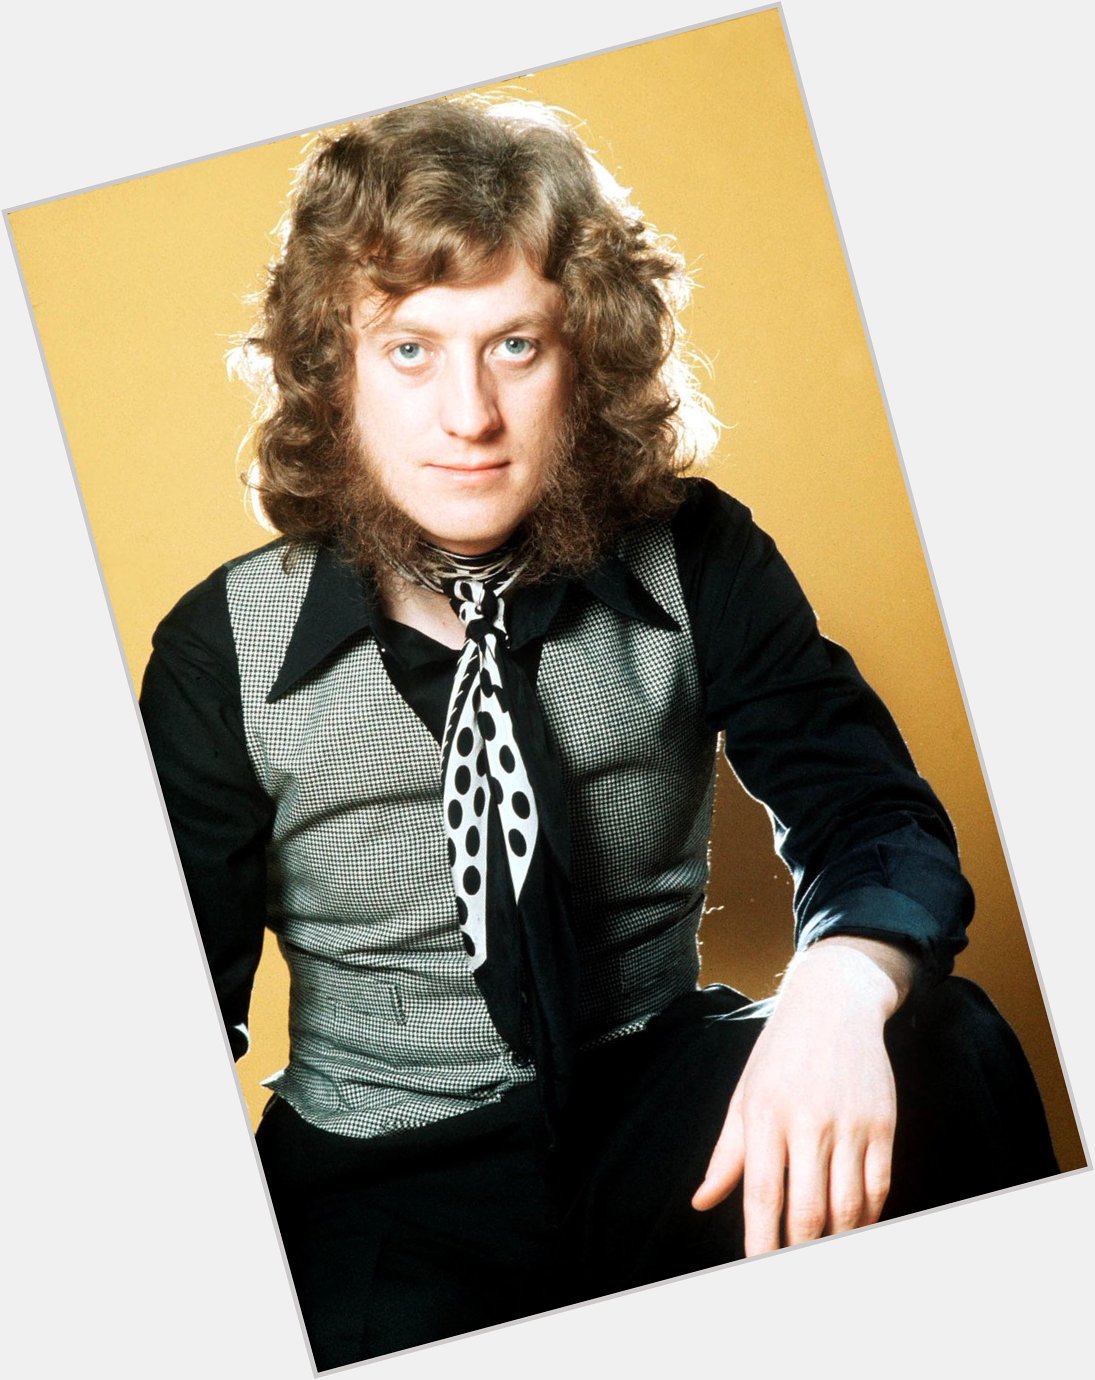 Happy 73rd birthday Noddy Holder! What\s your favourite Slade song ever? 